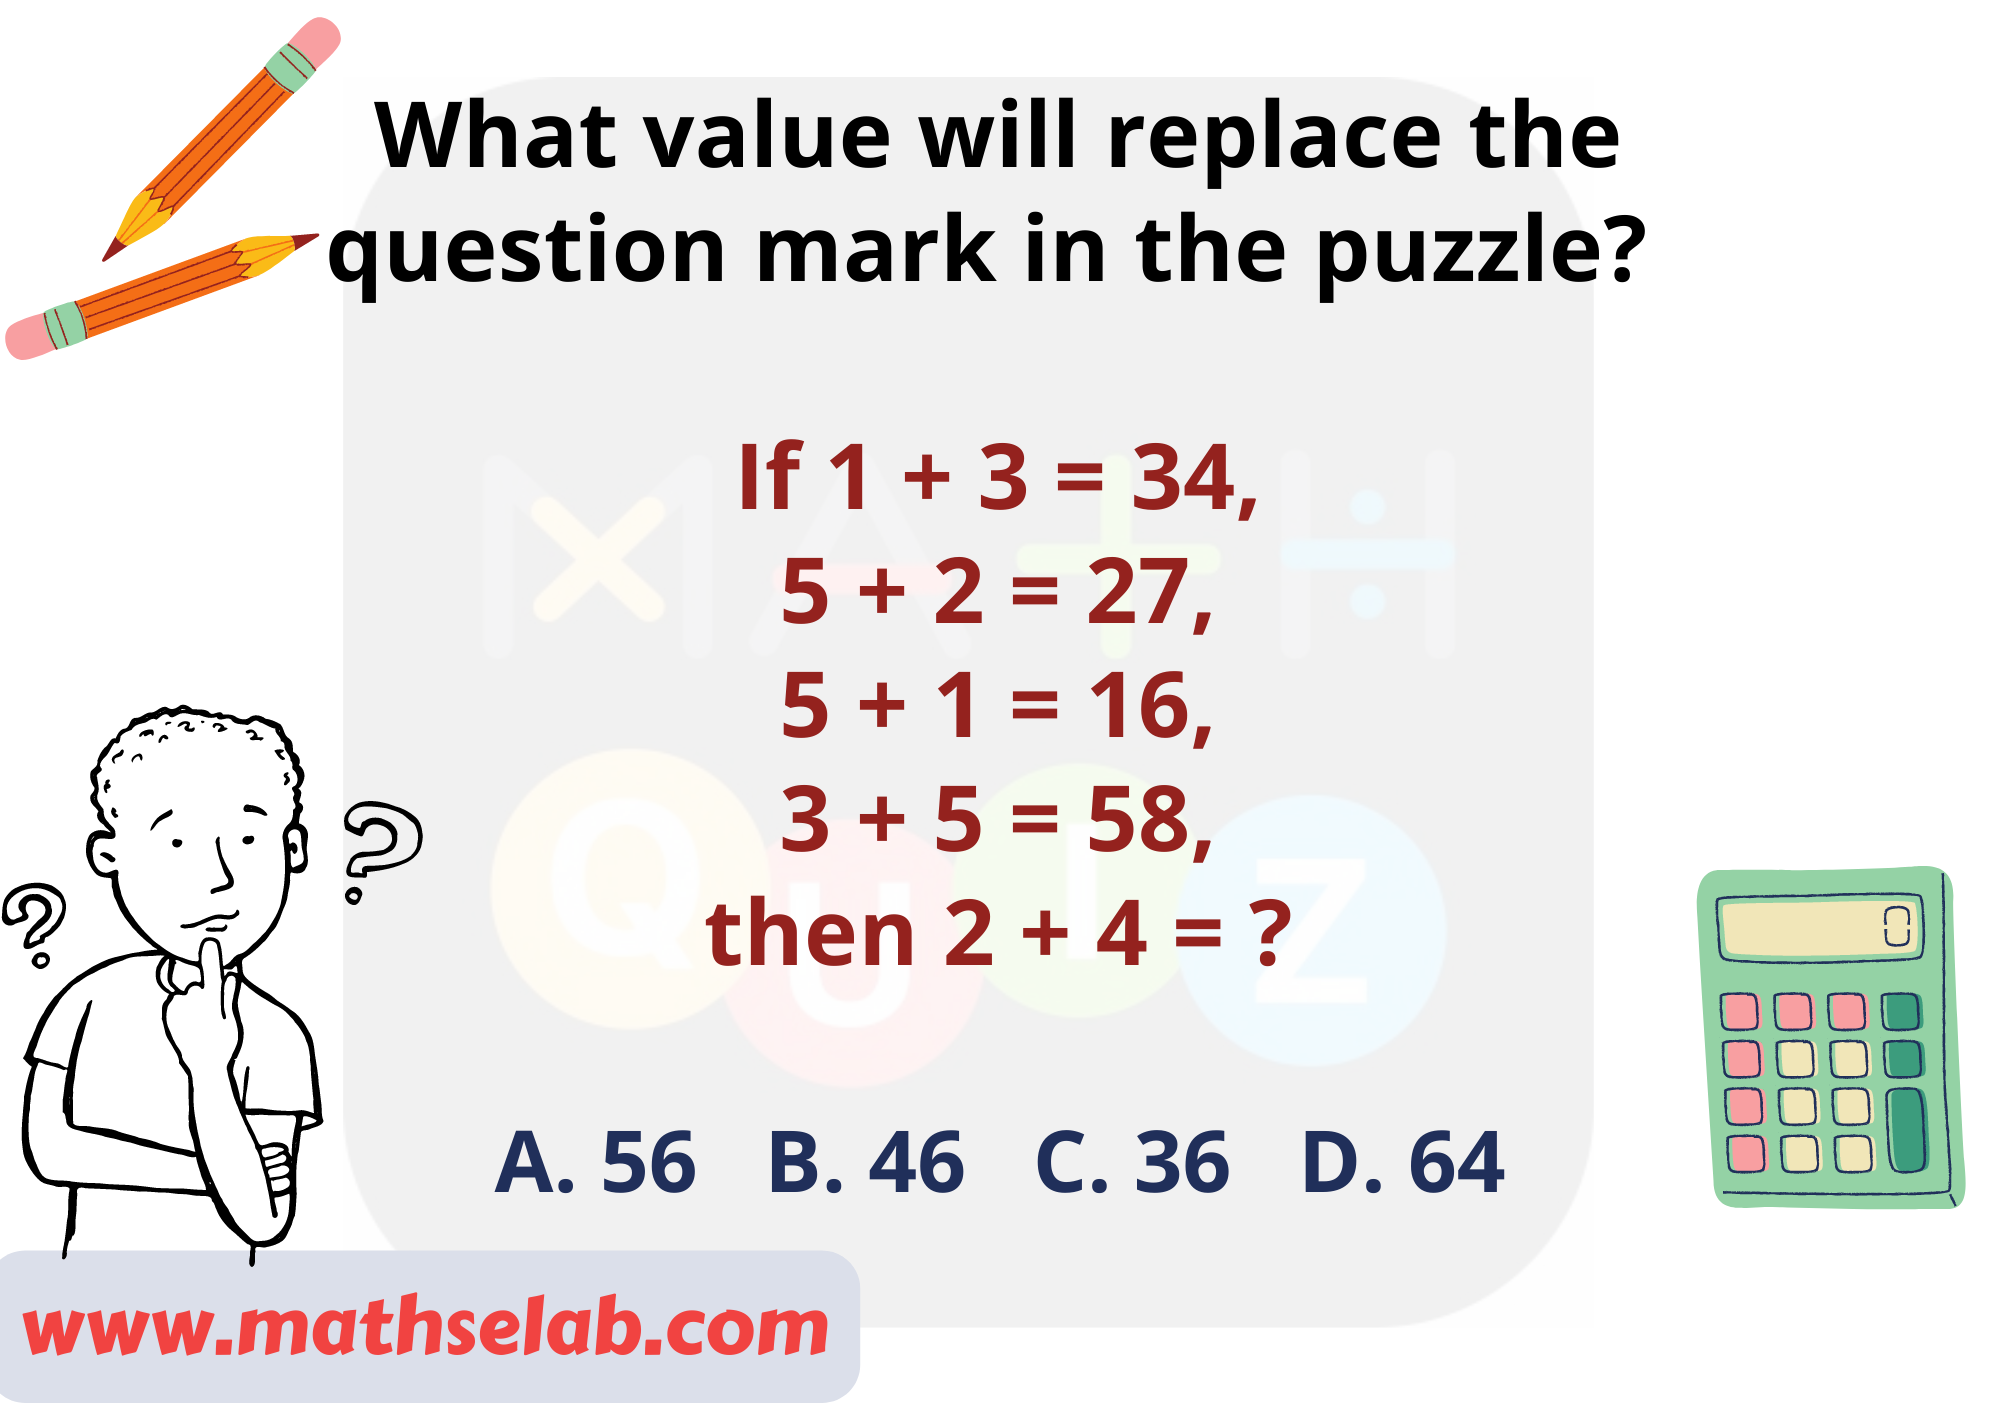 What value will replace the question mark in the puzzle? If 1 + 3 = 34, 5 + 2 = 27, 5 + 1 = 16, 3 + 5 = 58, then 2 + 4 = ?